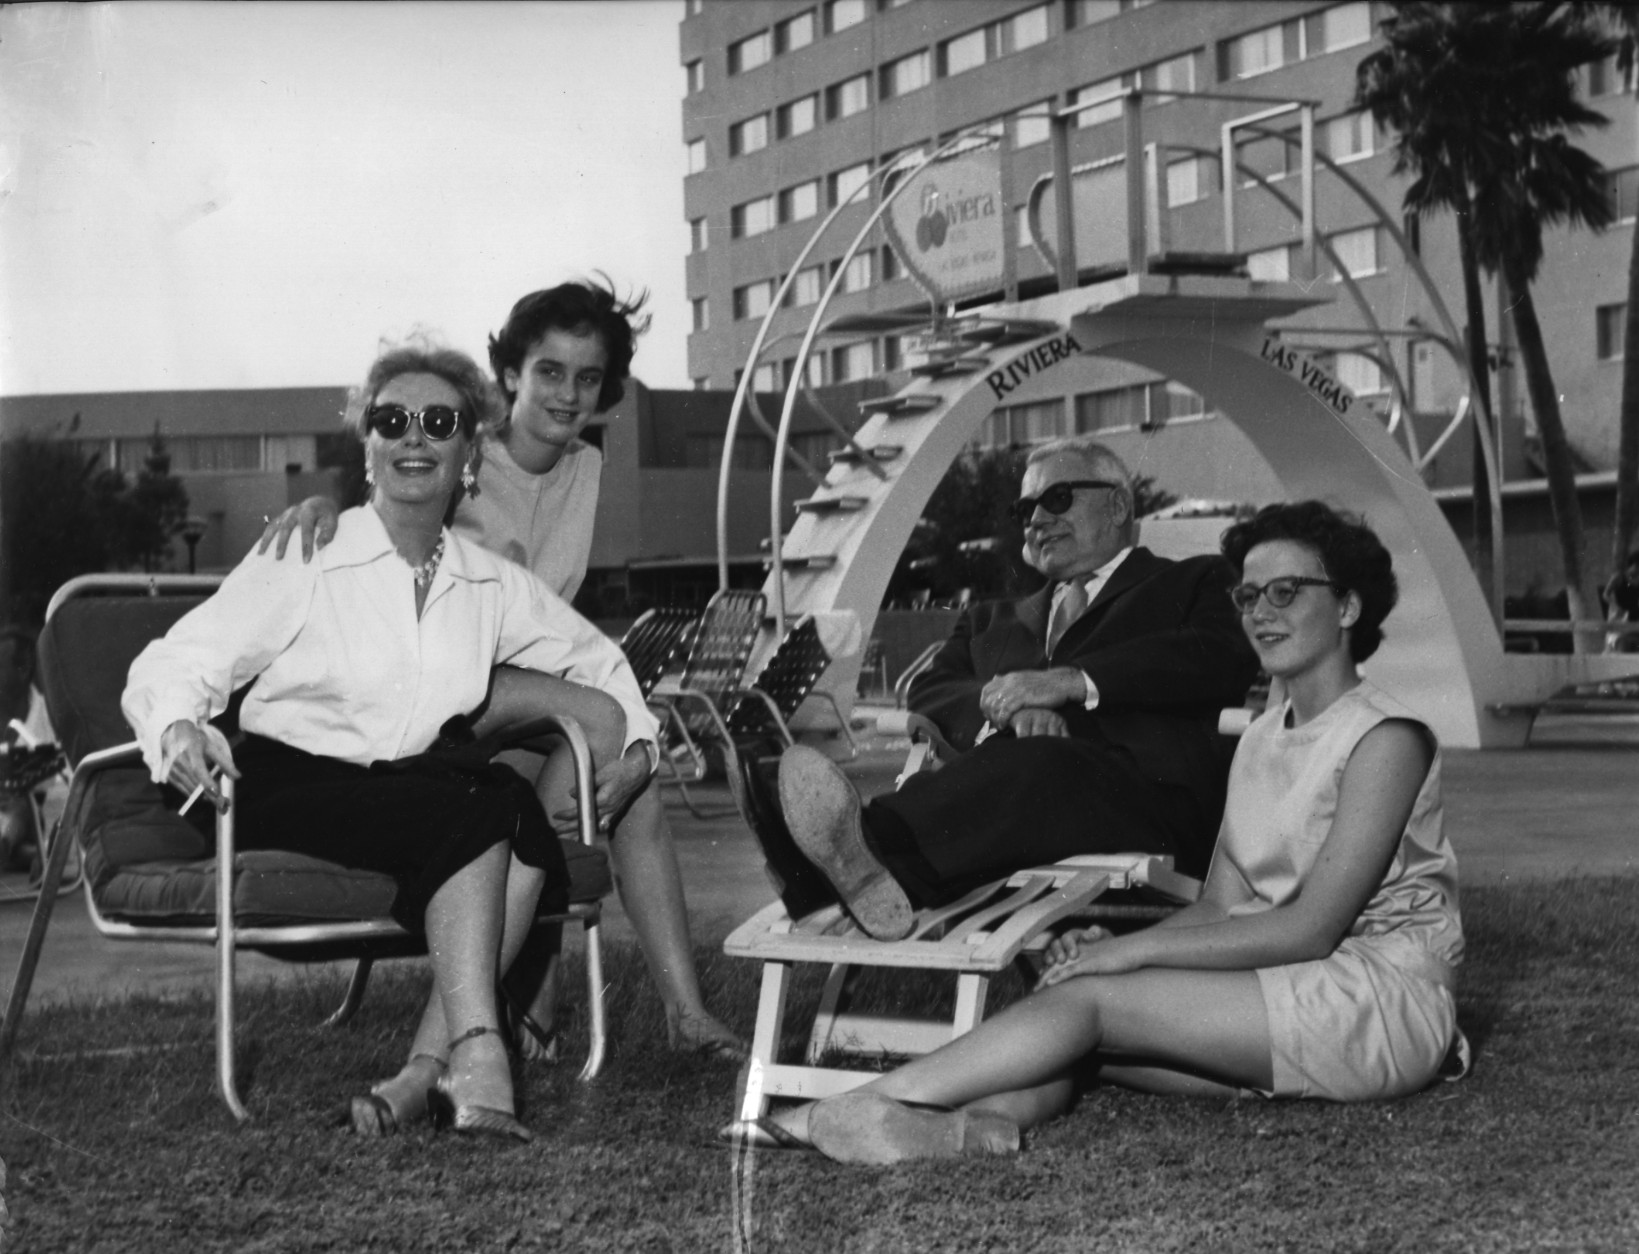 Actress Joan Crawford, left, relaxes with her husband Alfred N. Steele, and her 11-year-old twin daughters Cathy and Cindy at tthe pool of Las Vegas Riviera Hotel, USA, October 1958.  (AP Photo)